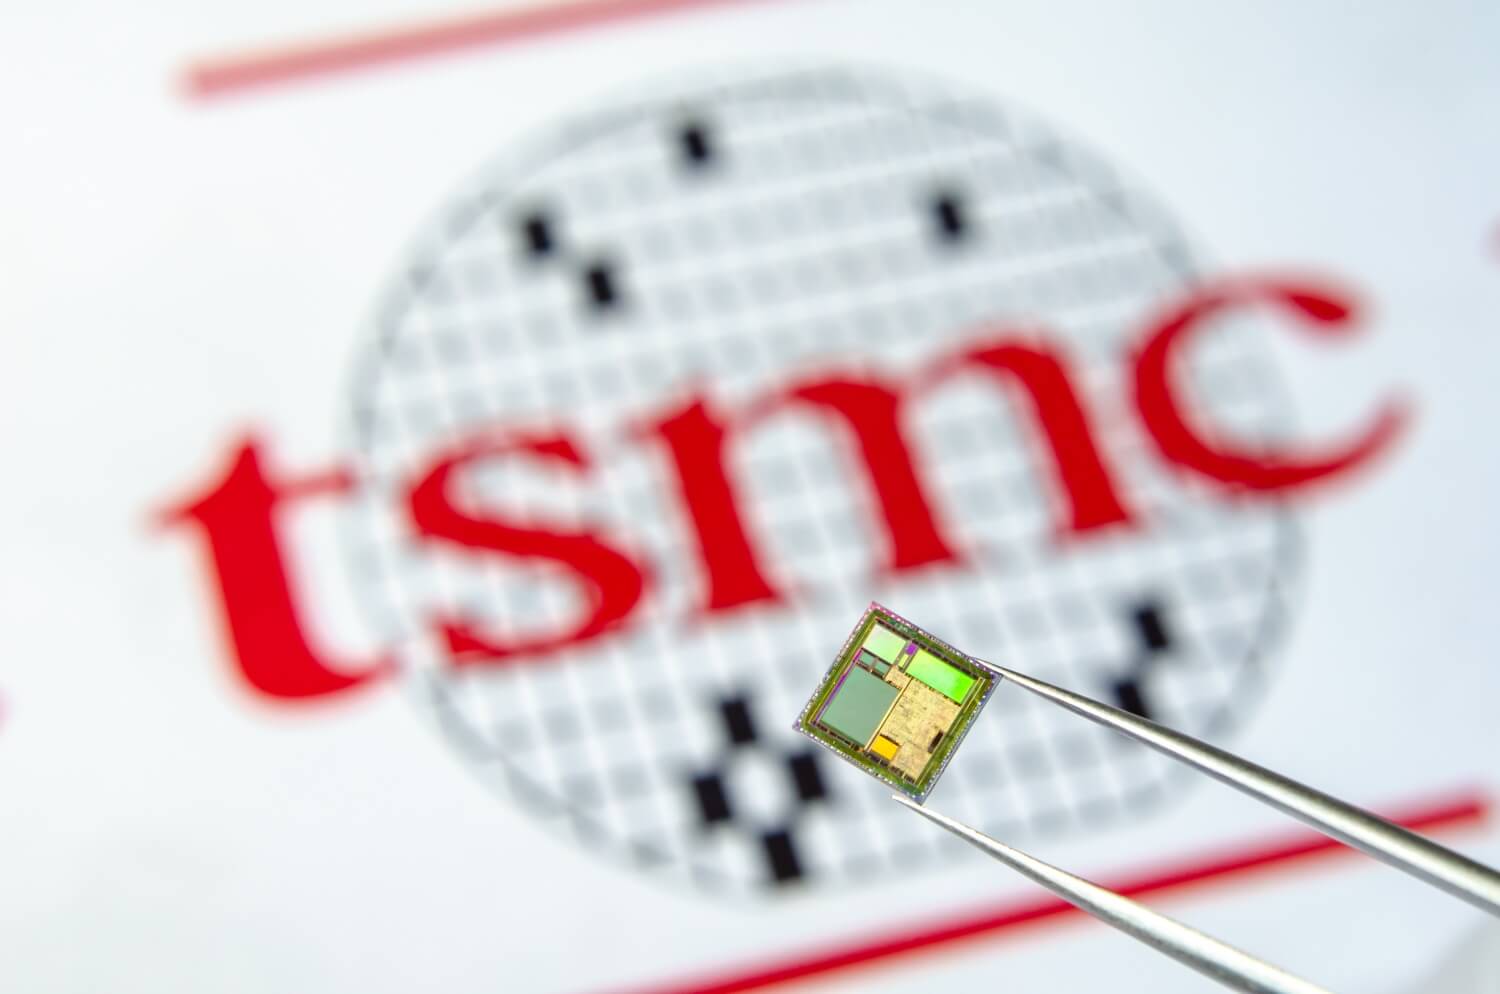 TSMC is spending $100 billion on expansion and R&D across the next three years